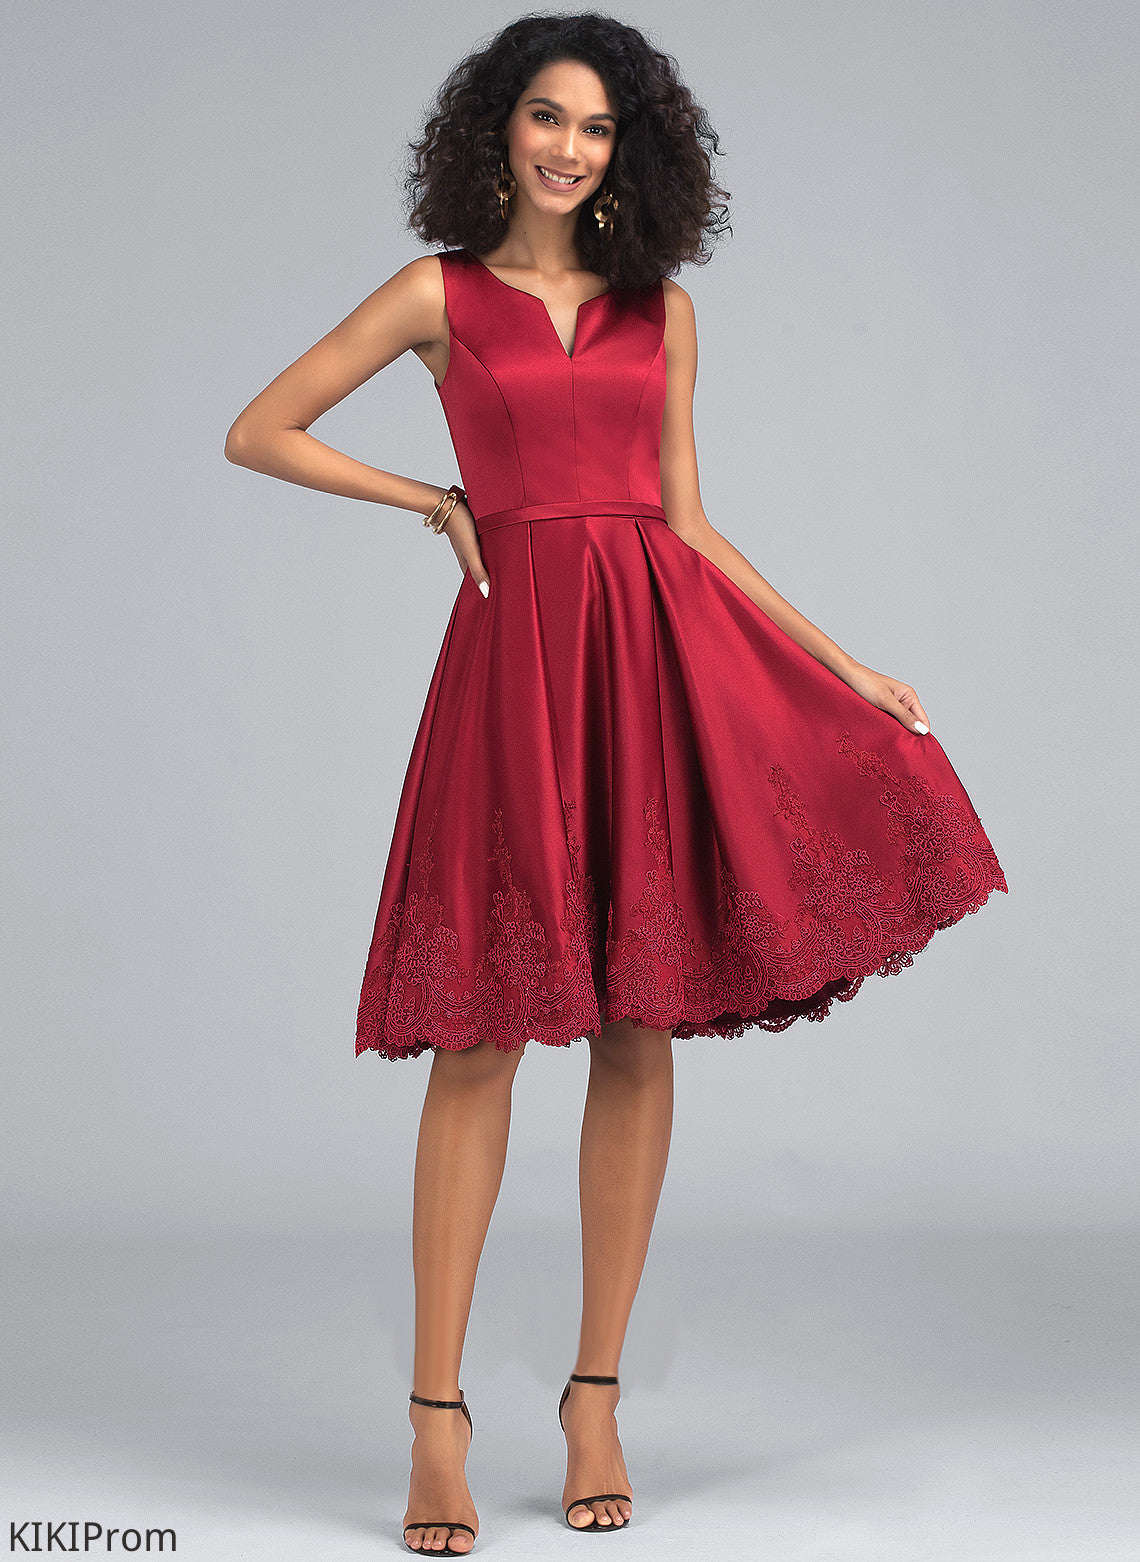 Homecoming Lace Emmalee With Knee-Length V-neck Dress A-Line Appliques Homecoming Dresses Satin